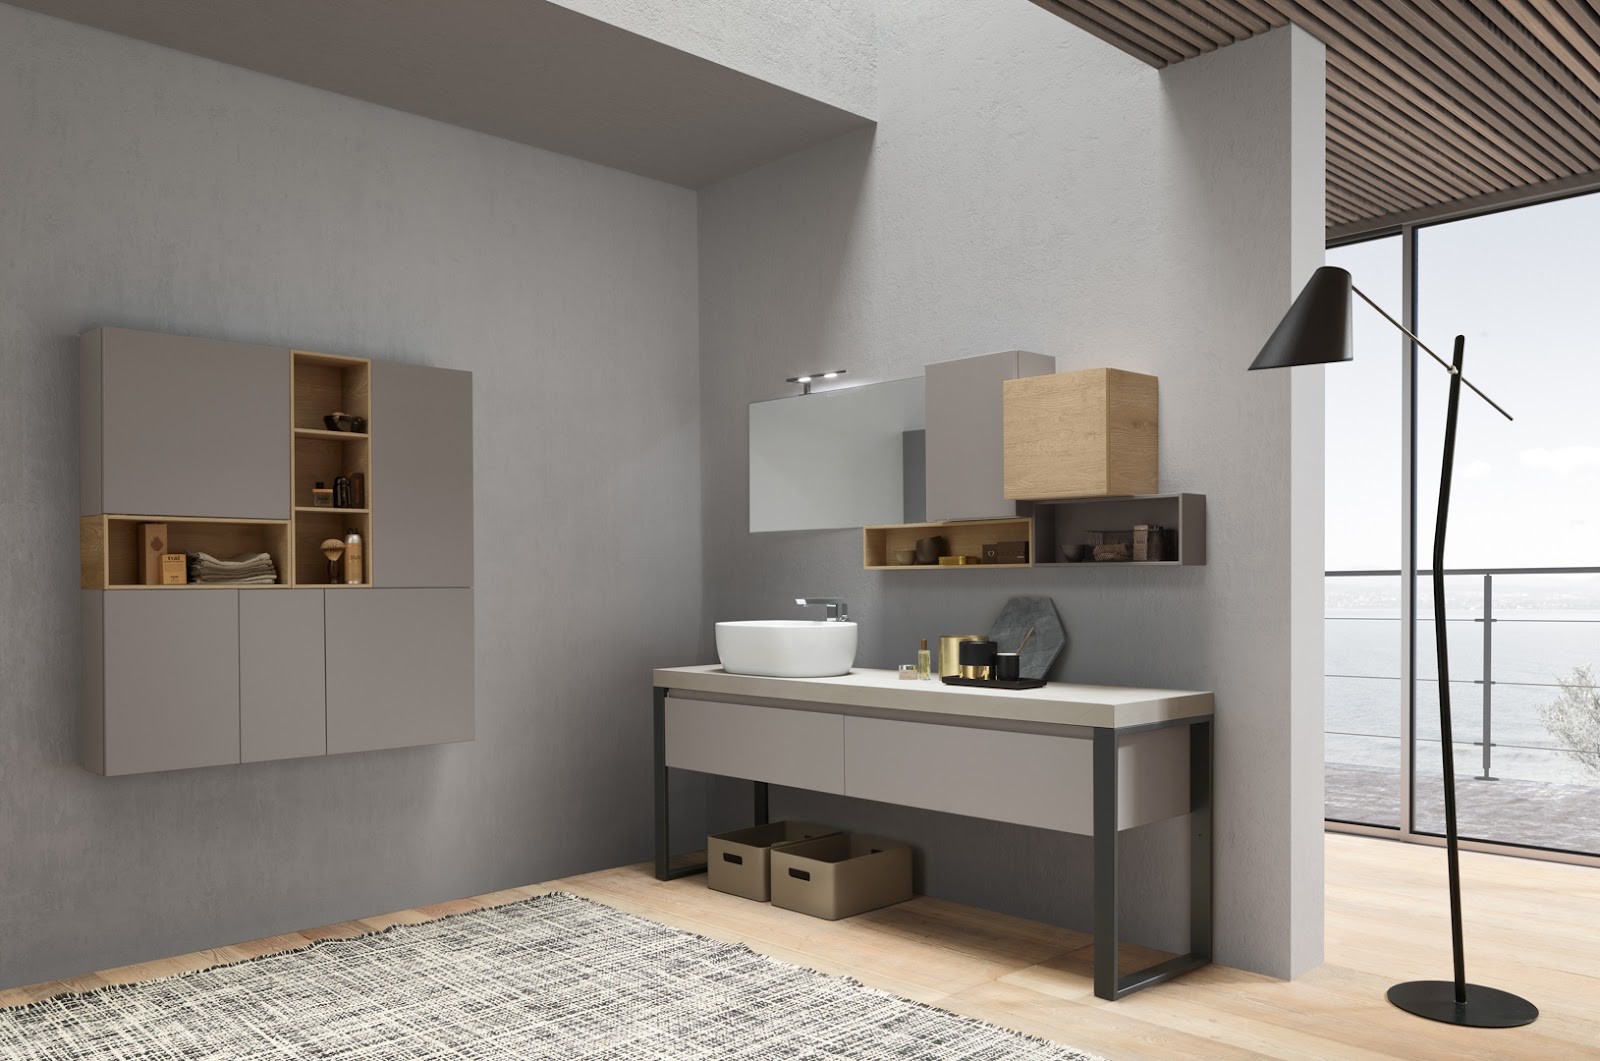 Wood-look cabinets and shelves complement their matte taupe counterparts both as individual elements and as carefully configured wall-mounted storage pieces.